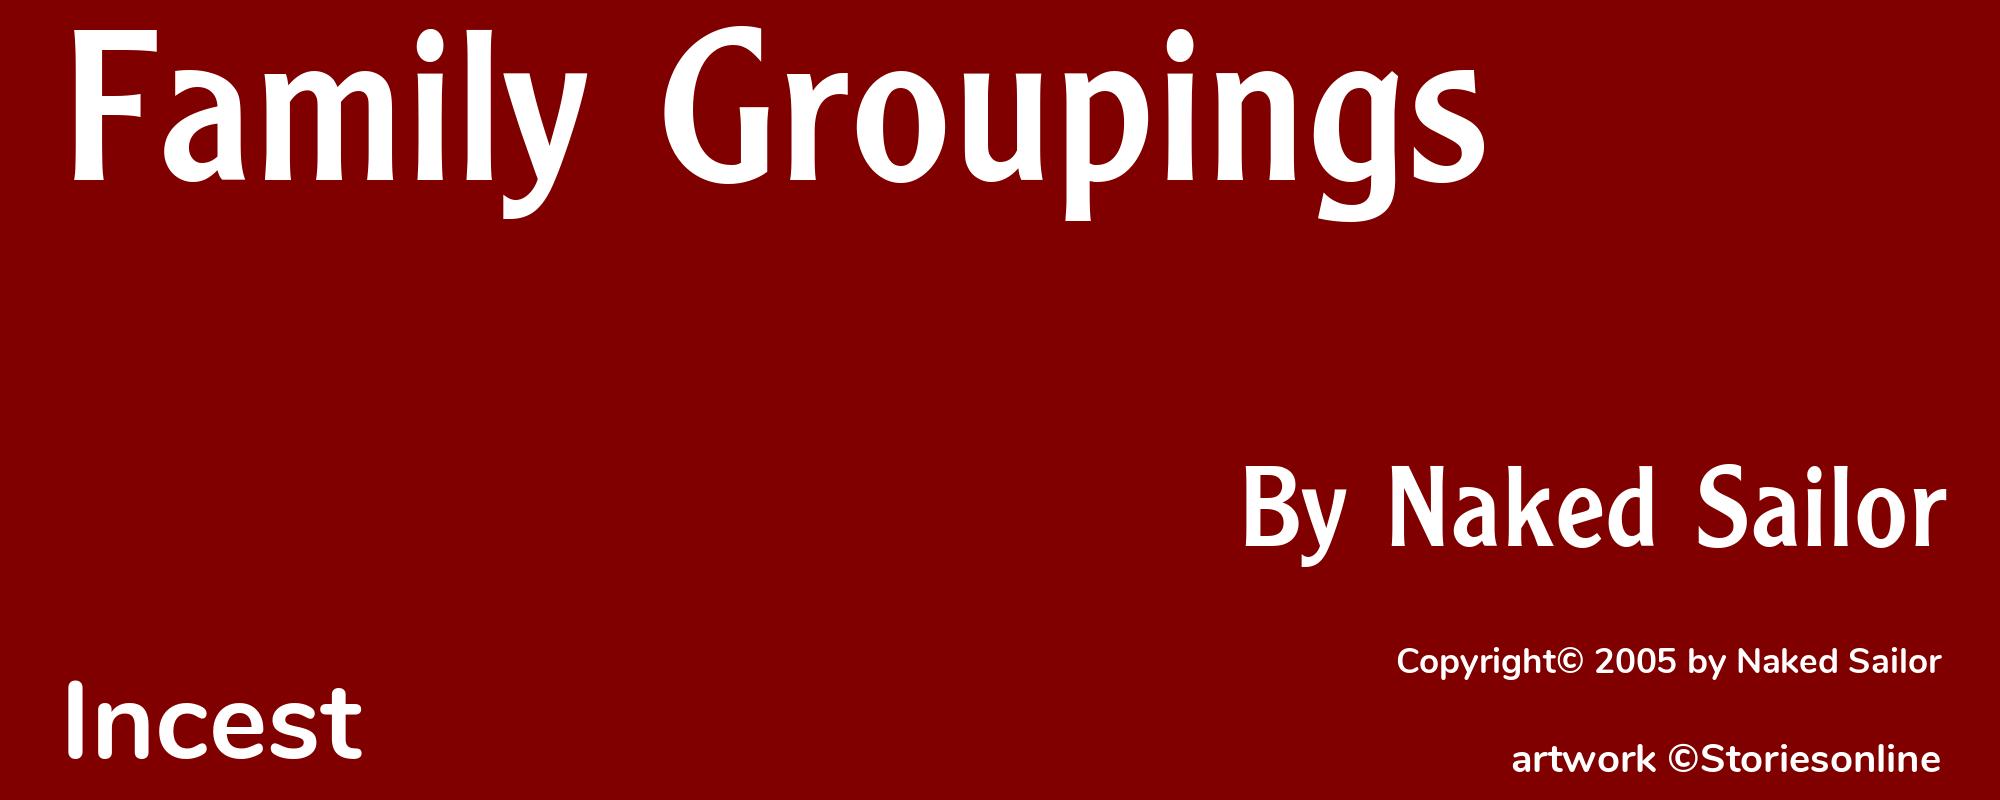 Family Groupings - Cover